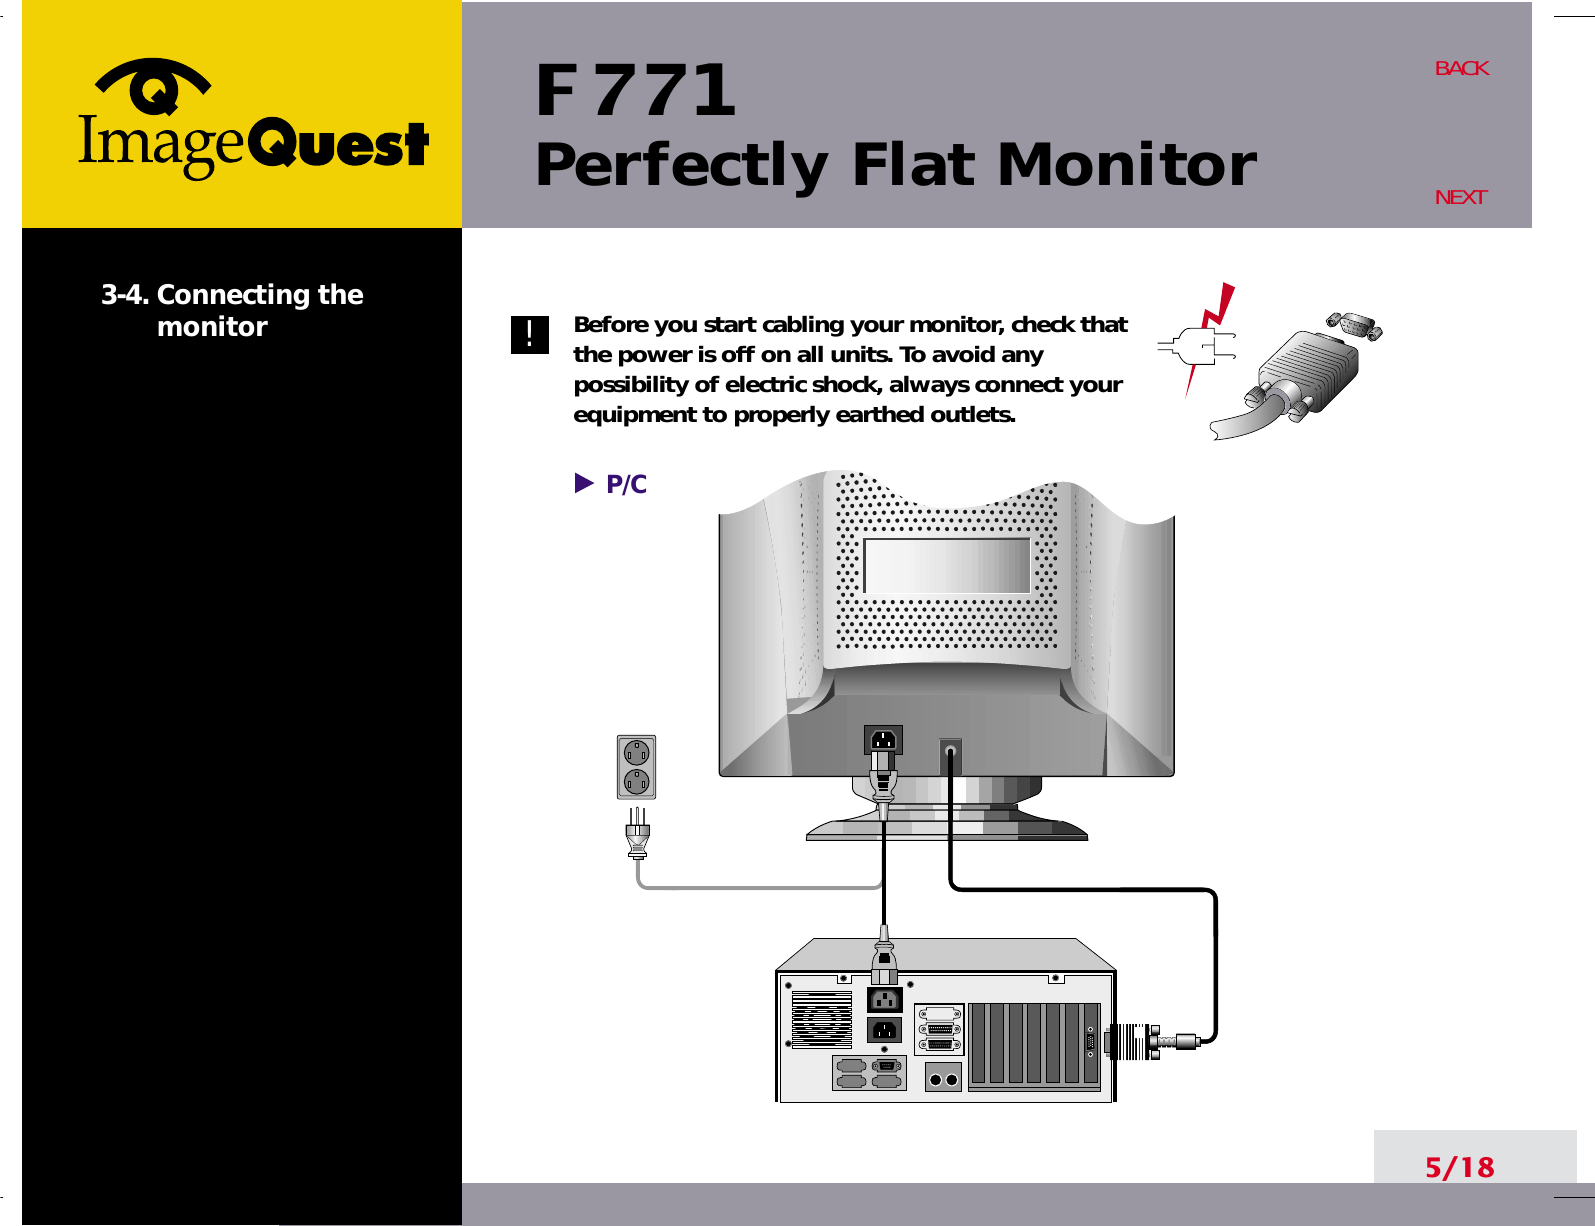 F 771Perfectly Flat Monitor5/18BACKNEXT3-4. Connecting themonitor Before you start cabling your monitor, check thatthe power is off on all units. To avoid anypossibility of electric shock, always connect yourequipment to properly earthed outlets.!P/C